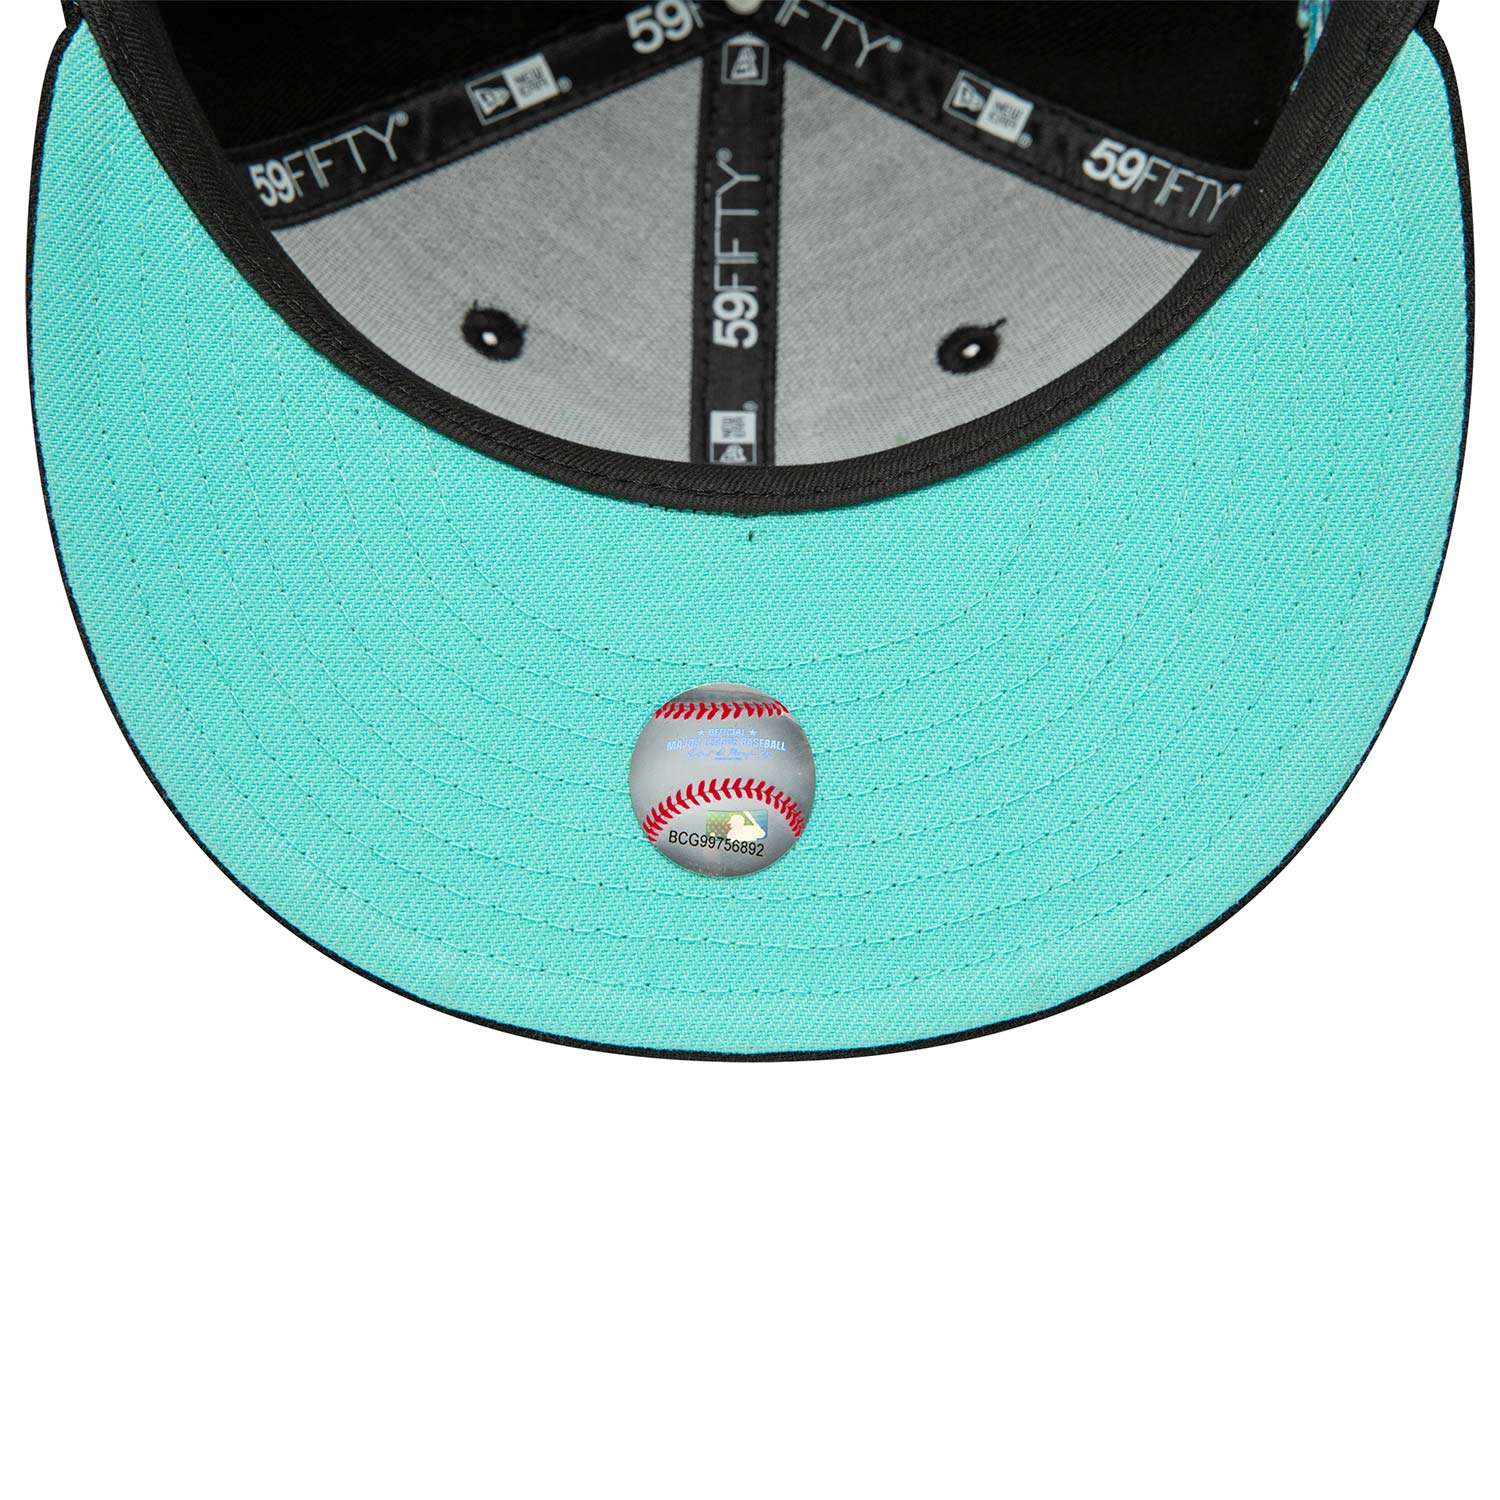 Anahiem Angels Black and Blue Tint 59FIFTY Fitted Cap